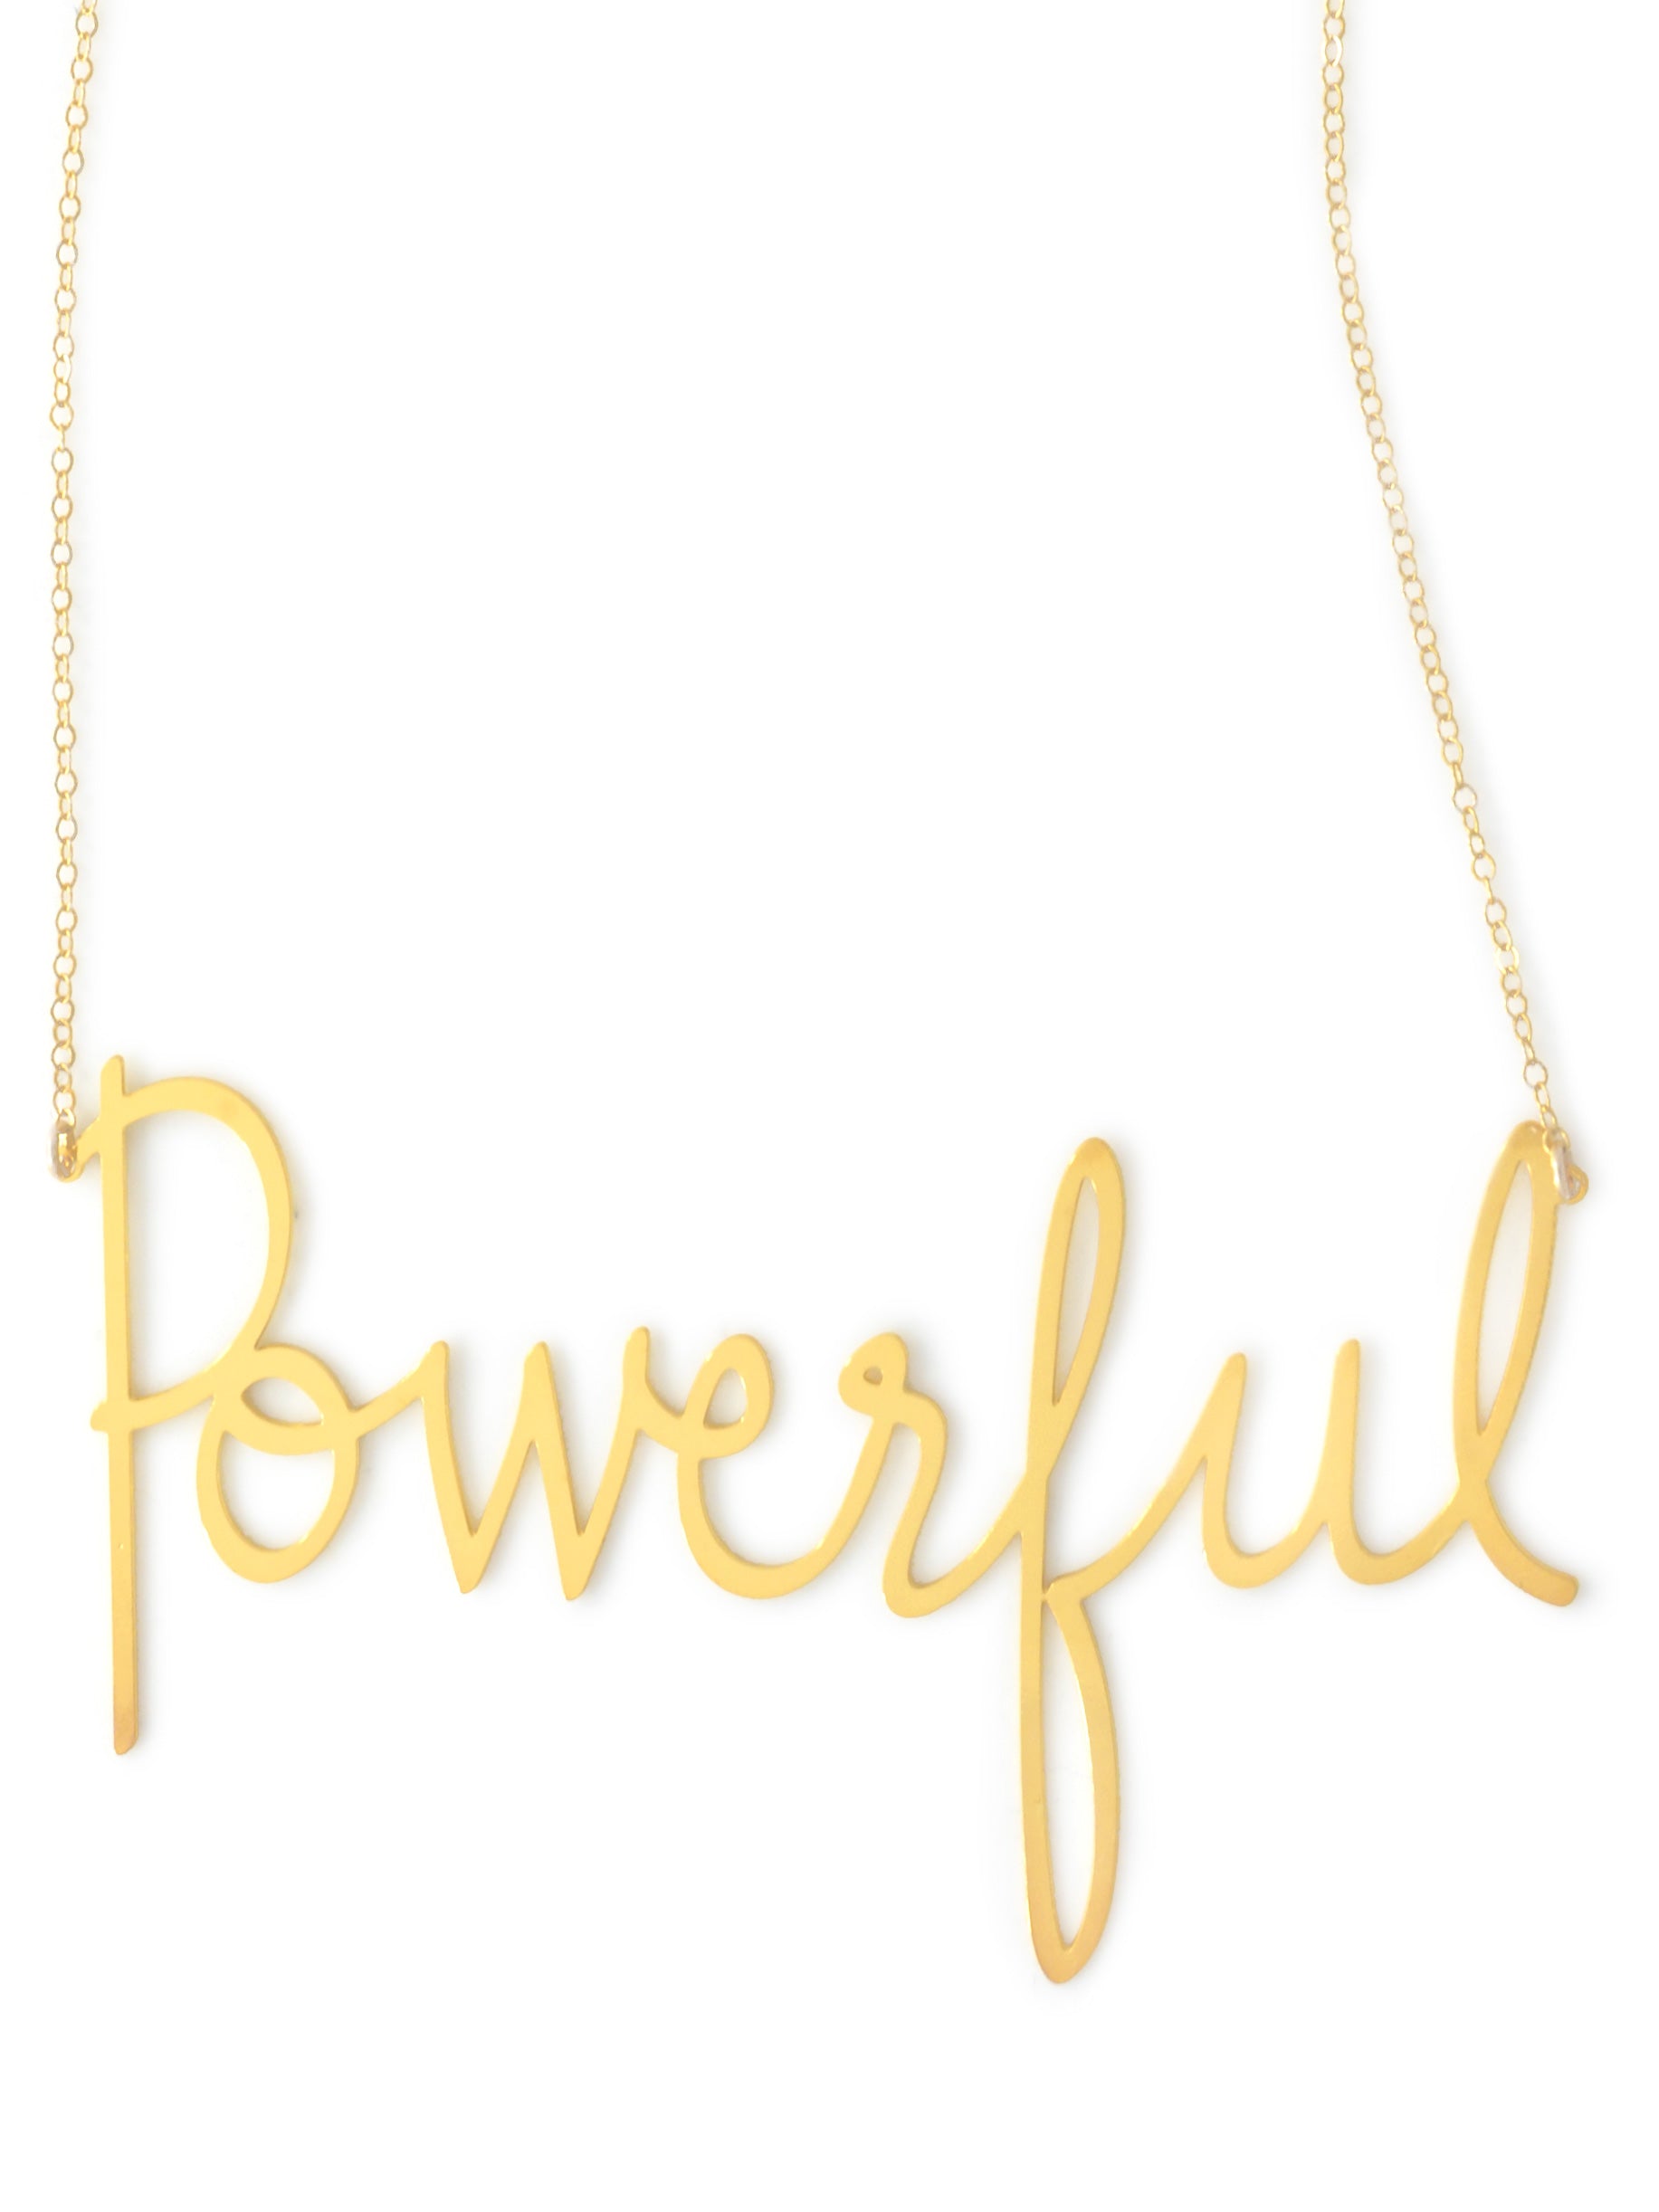 Powerful Necklace - High Quality, Affordable, Hand Written, Empowering, Self Love, Mantra Word Necklace - Available in Gold and Silver - Small and Large Sizes - Made in USA - Brevity Jewelry